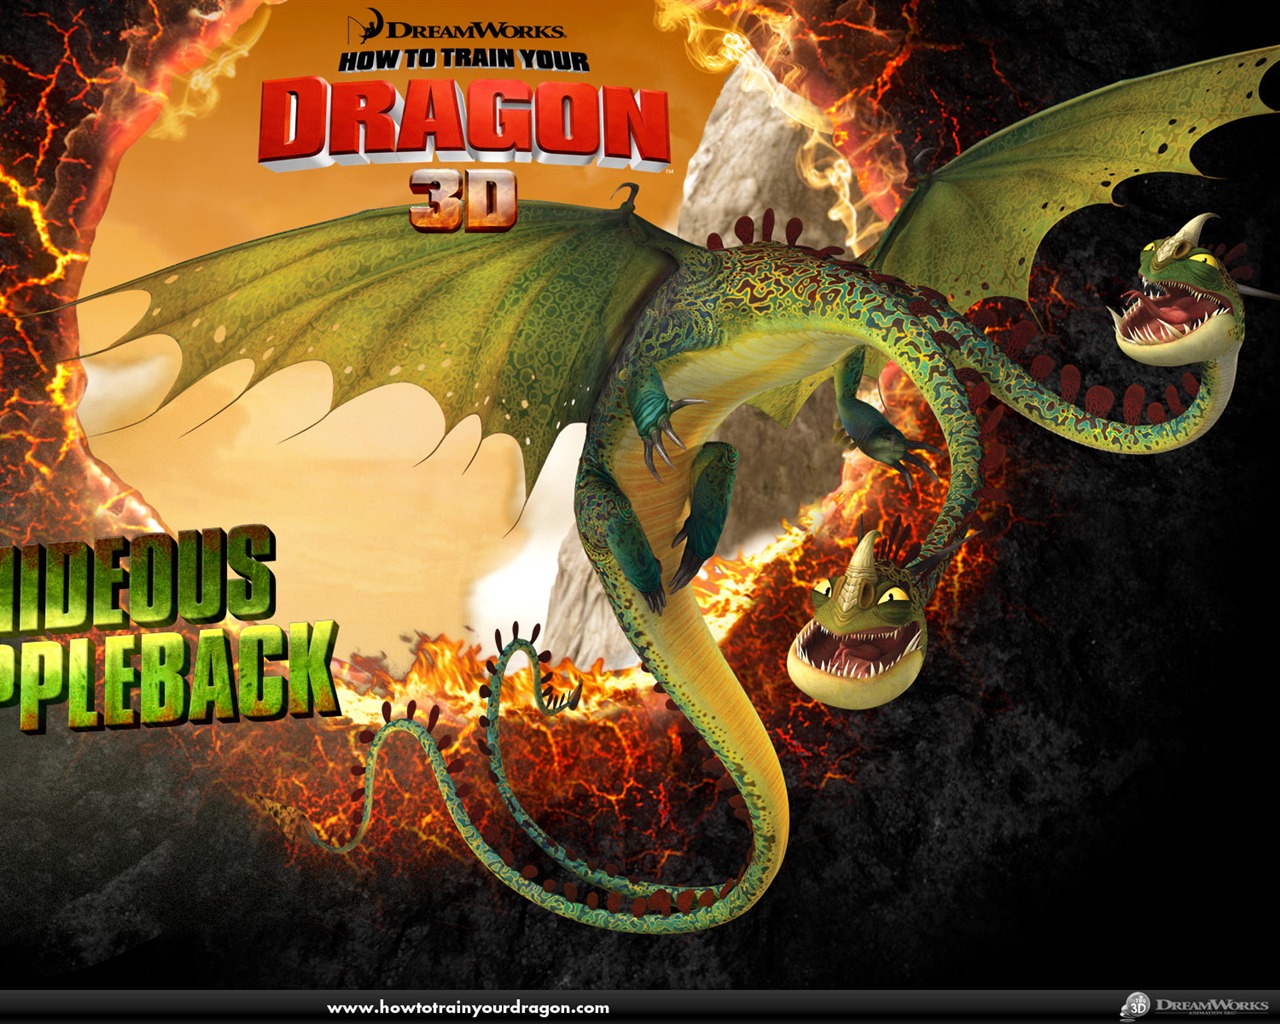 How to Train Your Dragon HD wallpaper #3 - 1280x1024